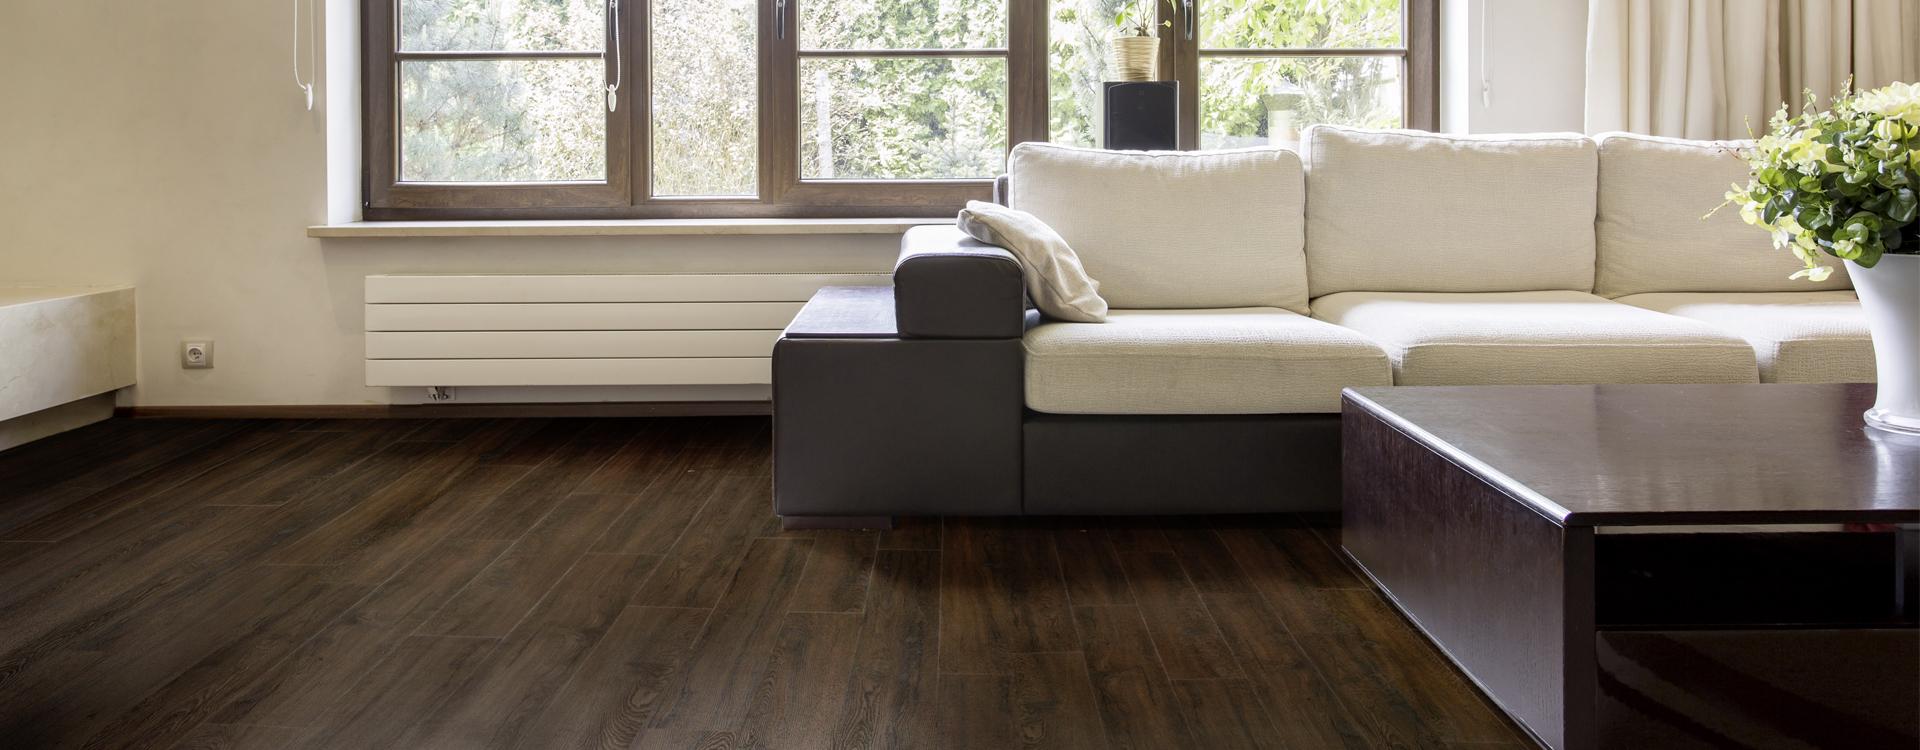 Horizen Flooring presents to you a picture of a quality wide plank Winchester luxury vinyl plank. NovoCore Premium EIR collection features a wide range of colors & designs that will compliment any interior. Natural wood grain synchronized surface allow for an authentic hardwood look & feel. This collection features a 0.25″ / 6.5 mm overall thickness and a durable 22 mil / 0.55 mm wear layer for residential and commercial applications.